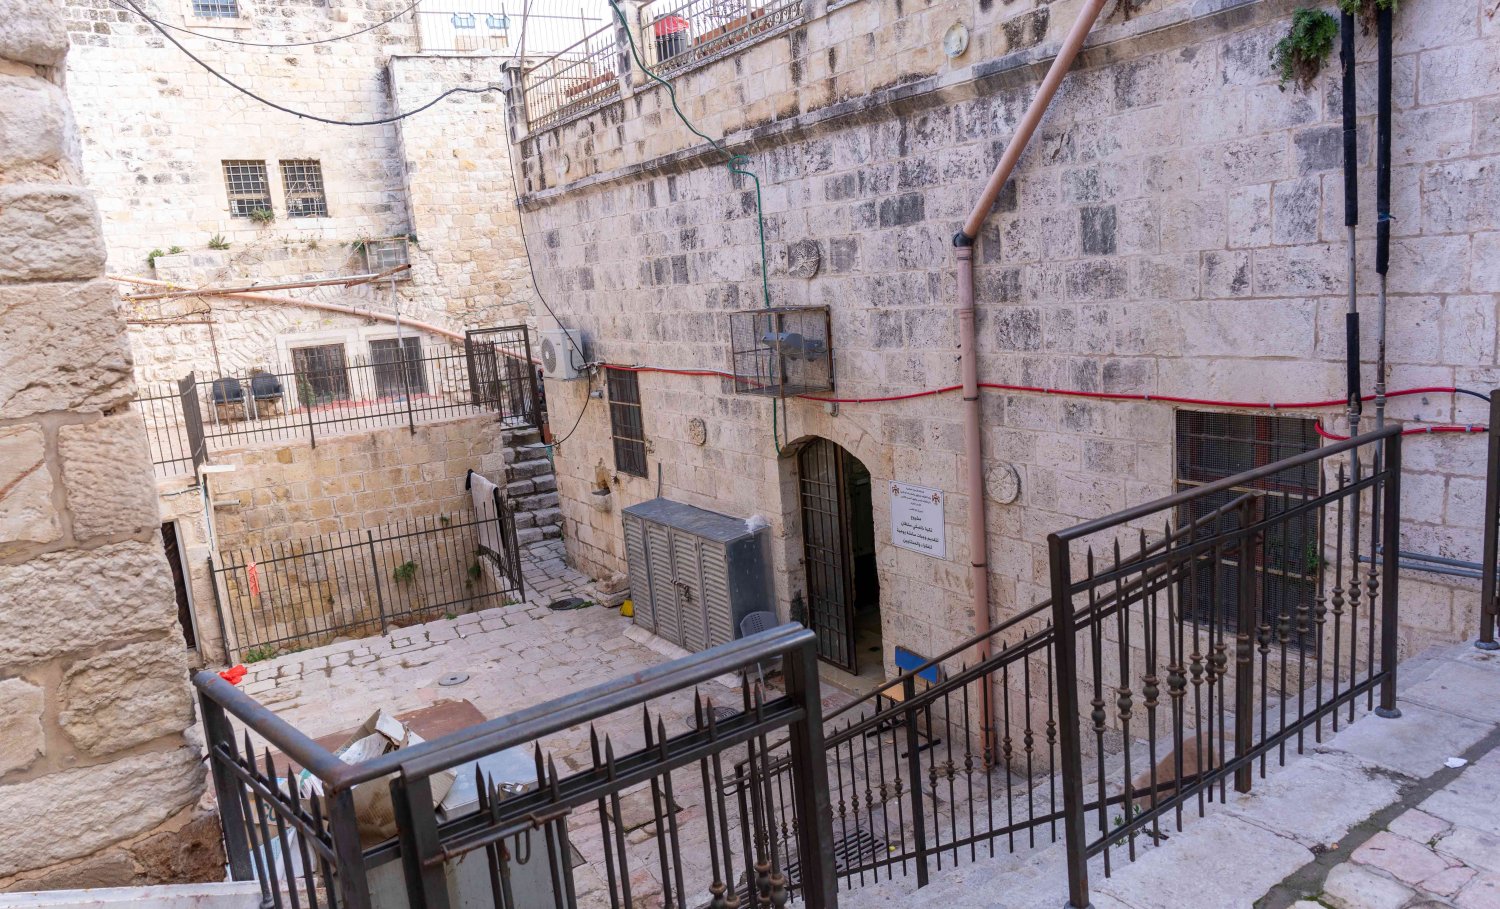 The entrance to the soup kitchen, viewed from above, in the Old City of Jerusalem